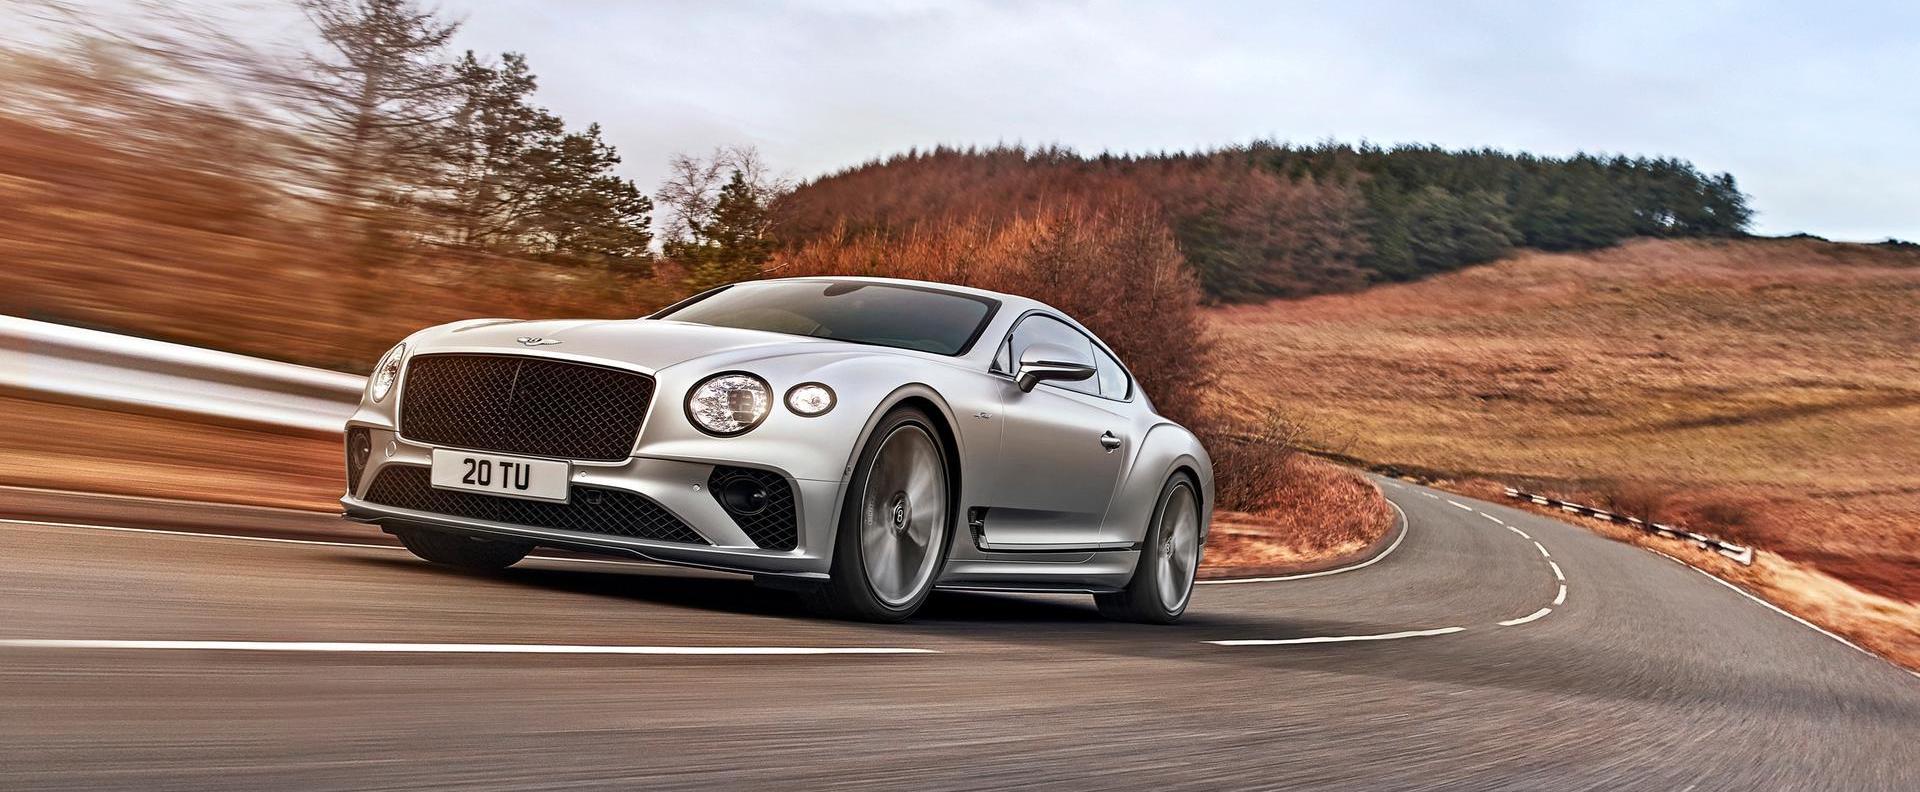 THE MOST DYNAMIC BENTLEY ROAD CAR IN HISTORY: THE NEW CONTINENTAL GT SPEED